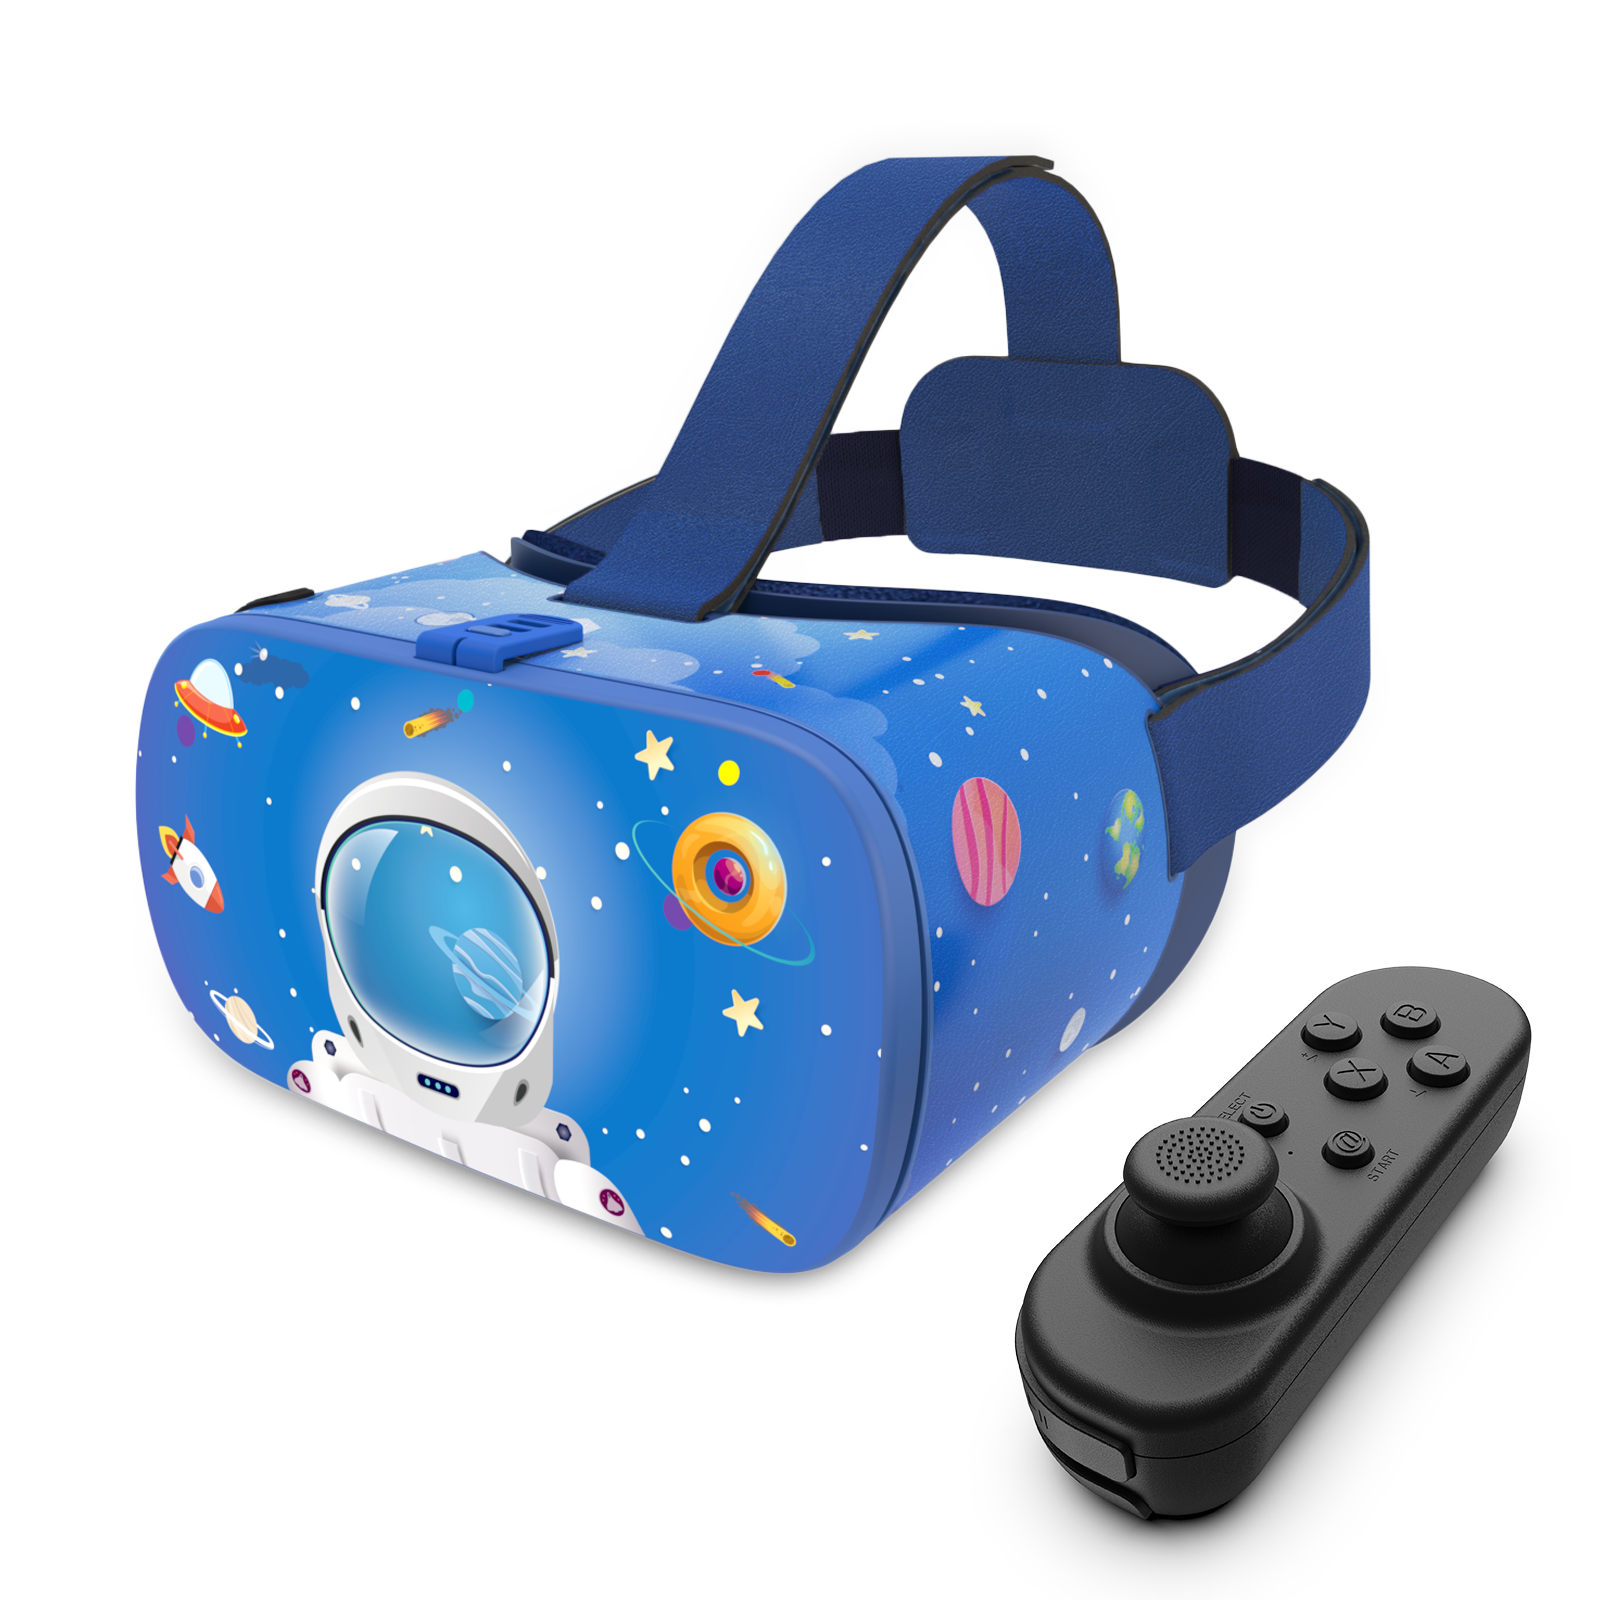 DESTEK VR Dream Headset with Controller for Kids, Best Phone VR Headset Compatible with Android & iPhone